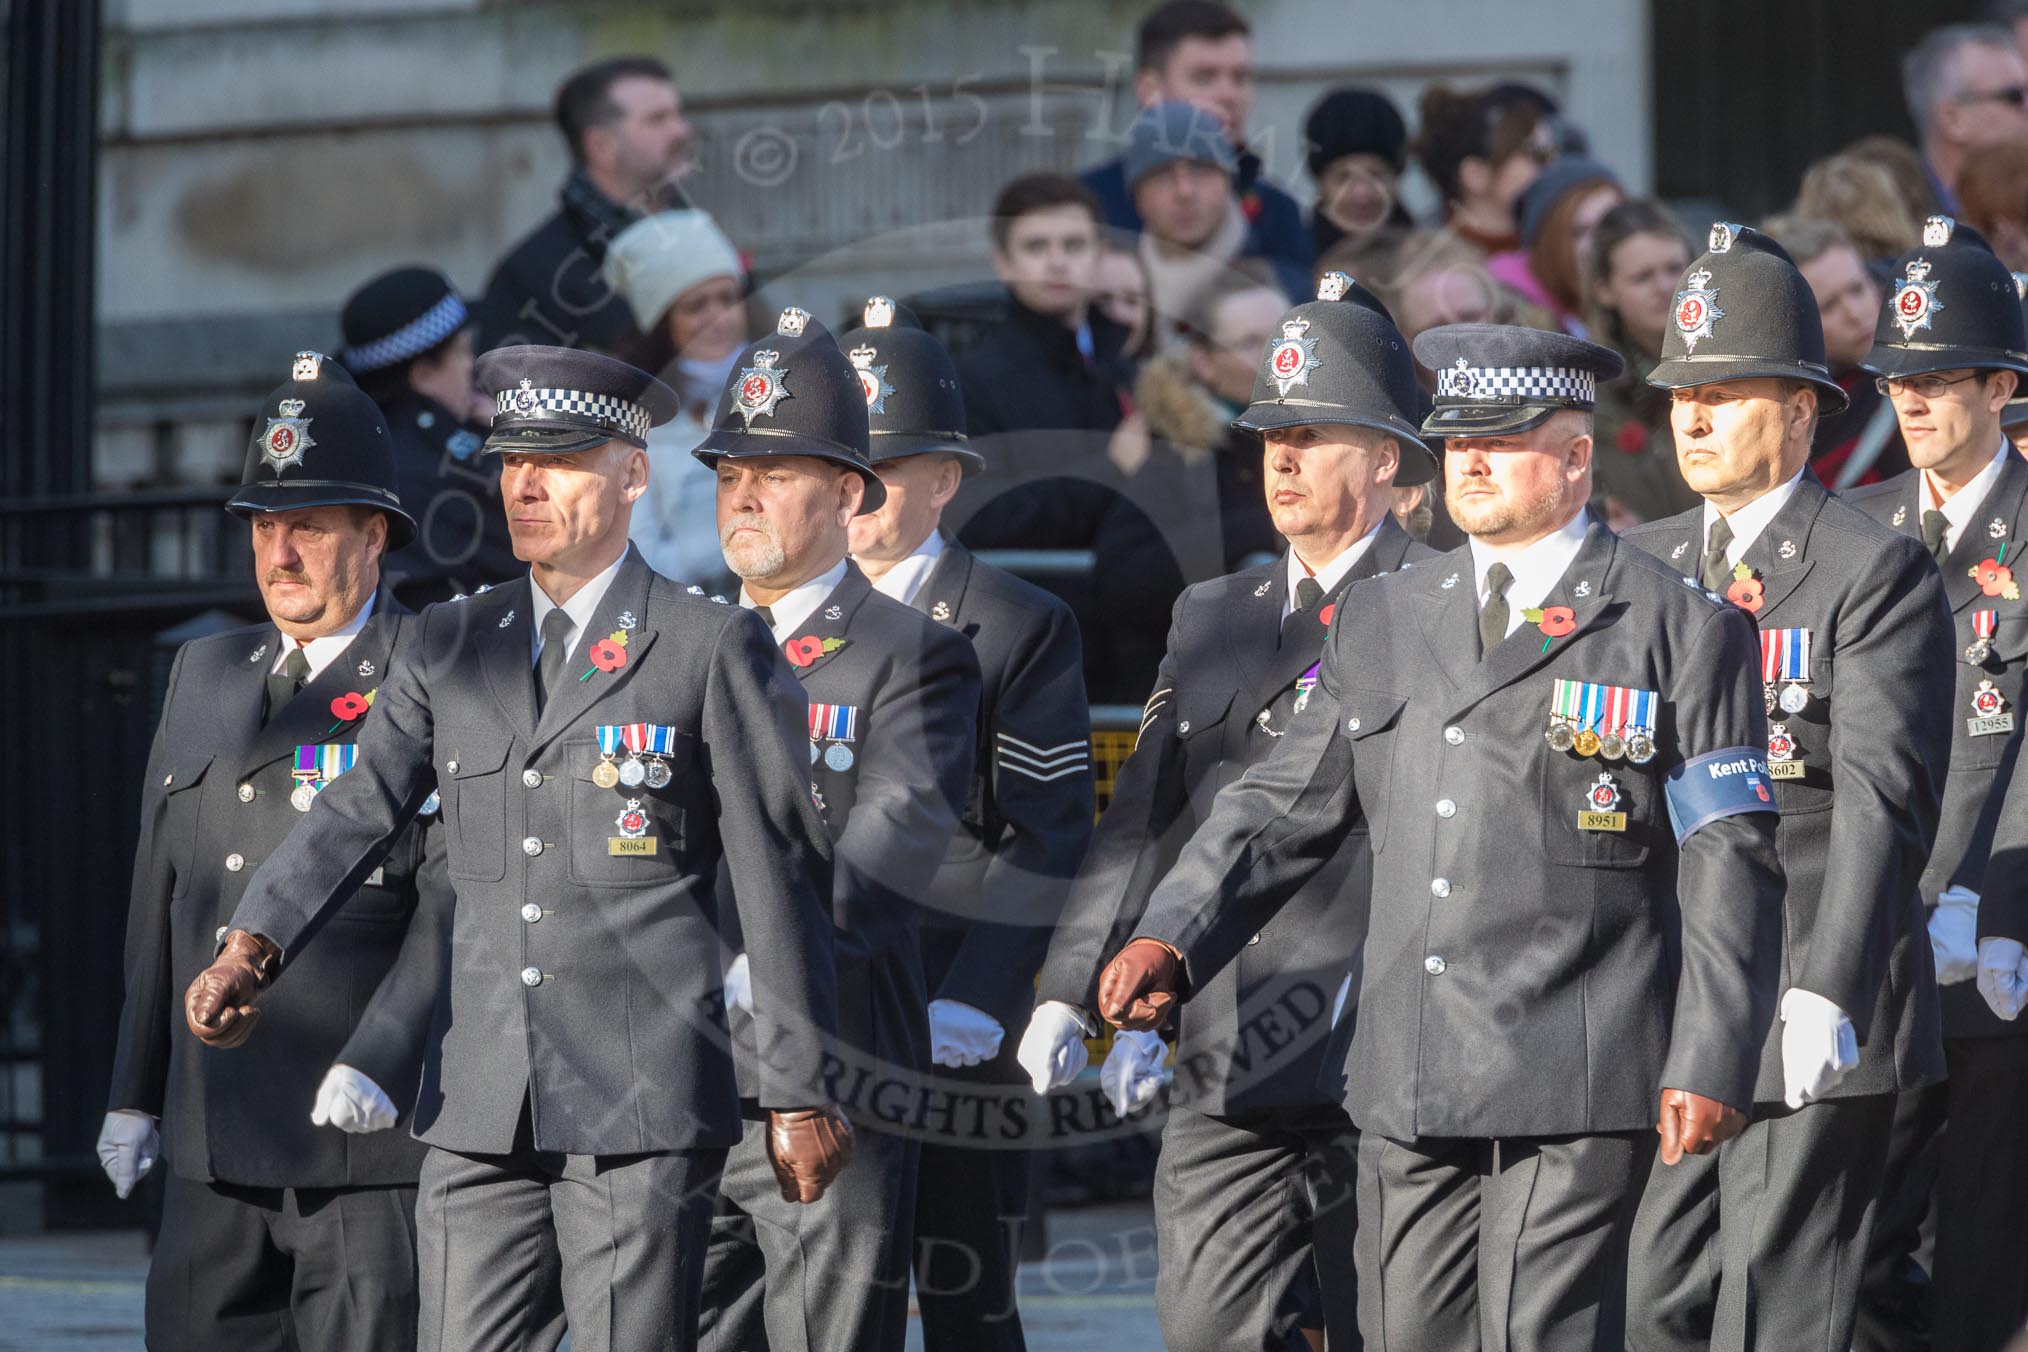 March Past, Remembrance Sunday at the Cenotaph 2016: M39 Kent Police.
Cenotaph, Whitehall, London SW1,
London,
Greater London,
United Kingdom,
on 13 November 2016 at 13:19, image #2927